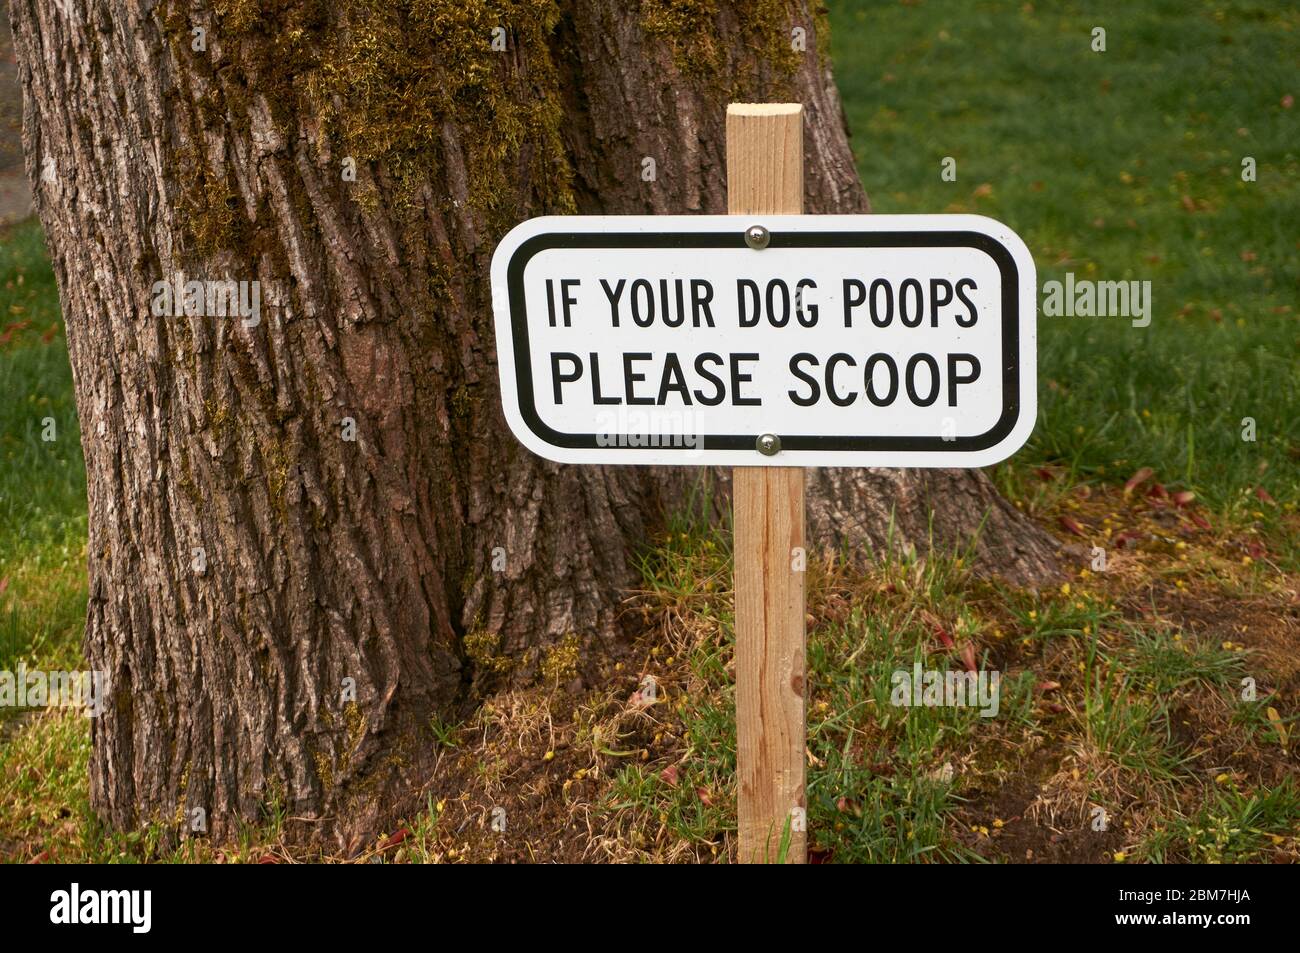 Sign in a garden asking dog owners to clean up after their dogs Stock Photo